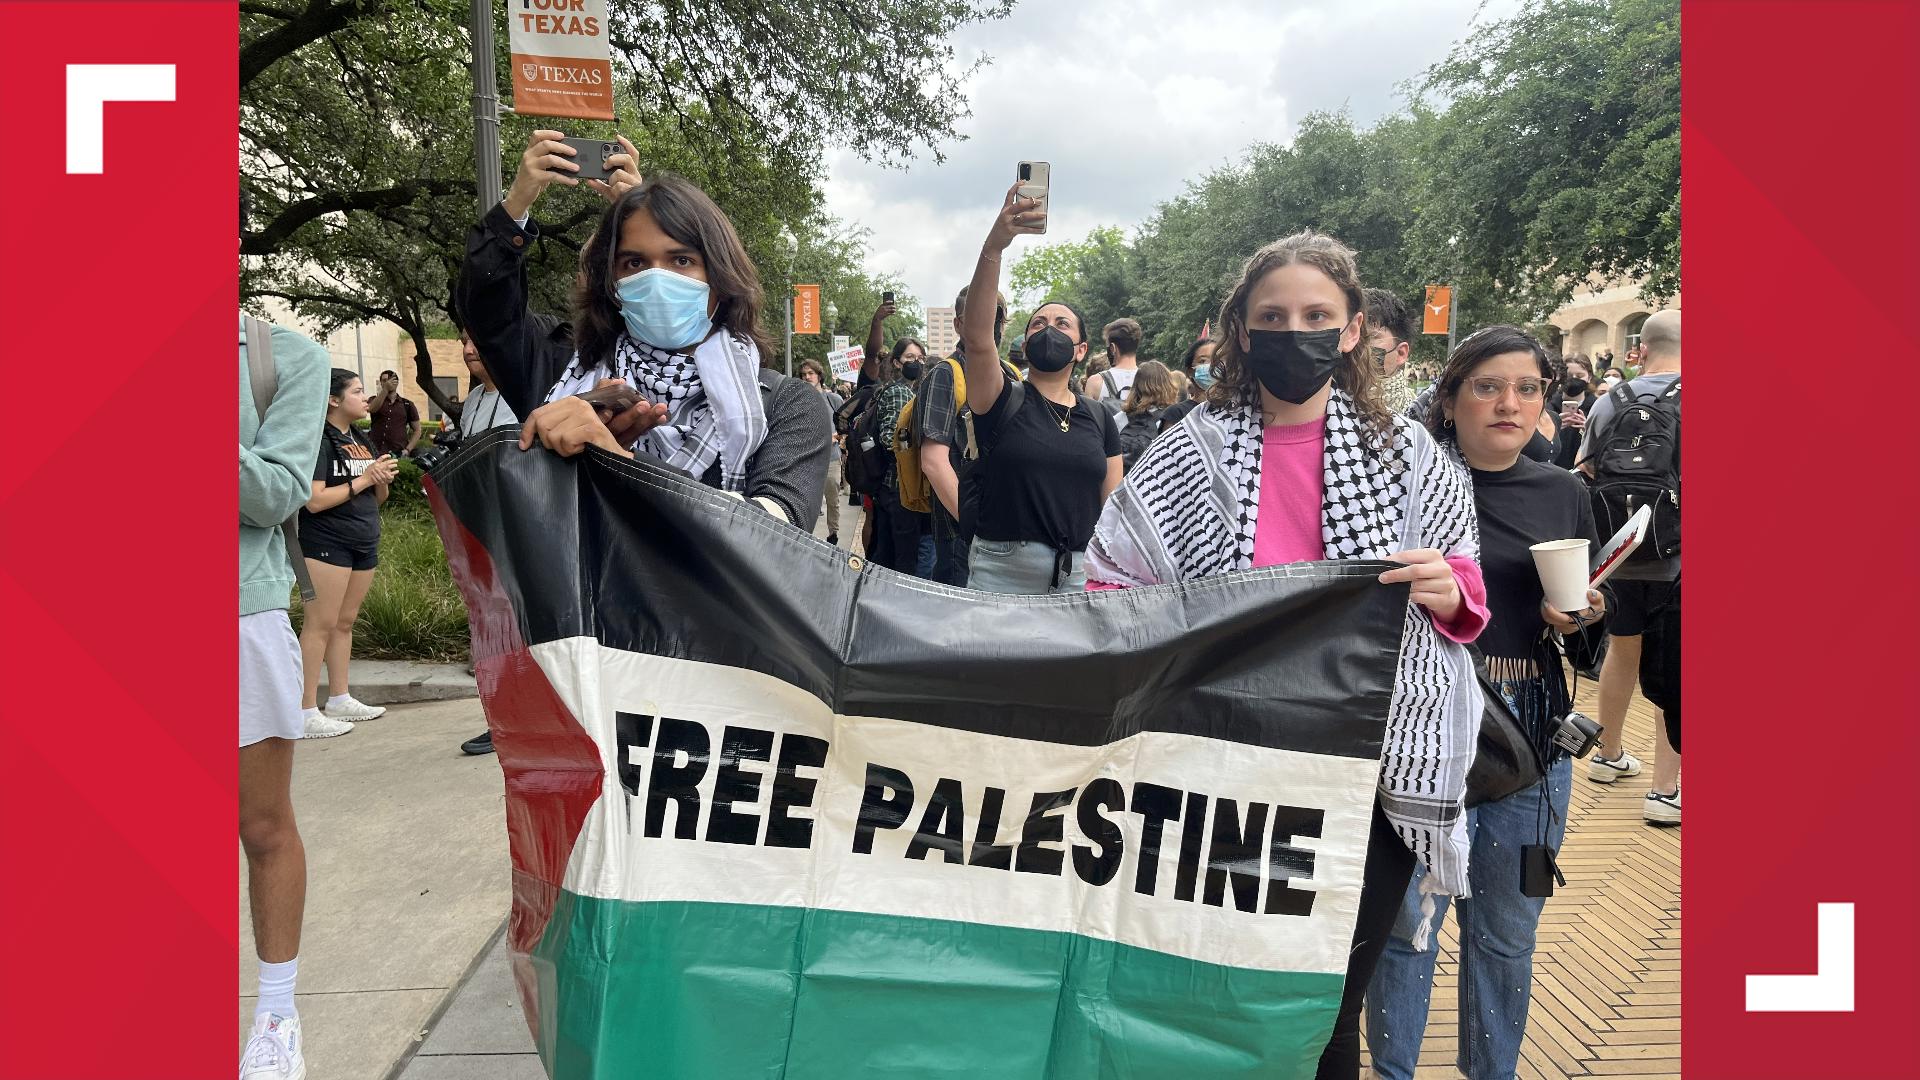 At least 3 arrests made at pro-Palestine protest on UT Austin campus